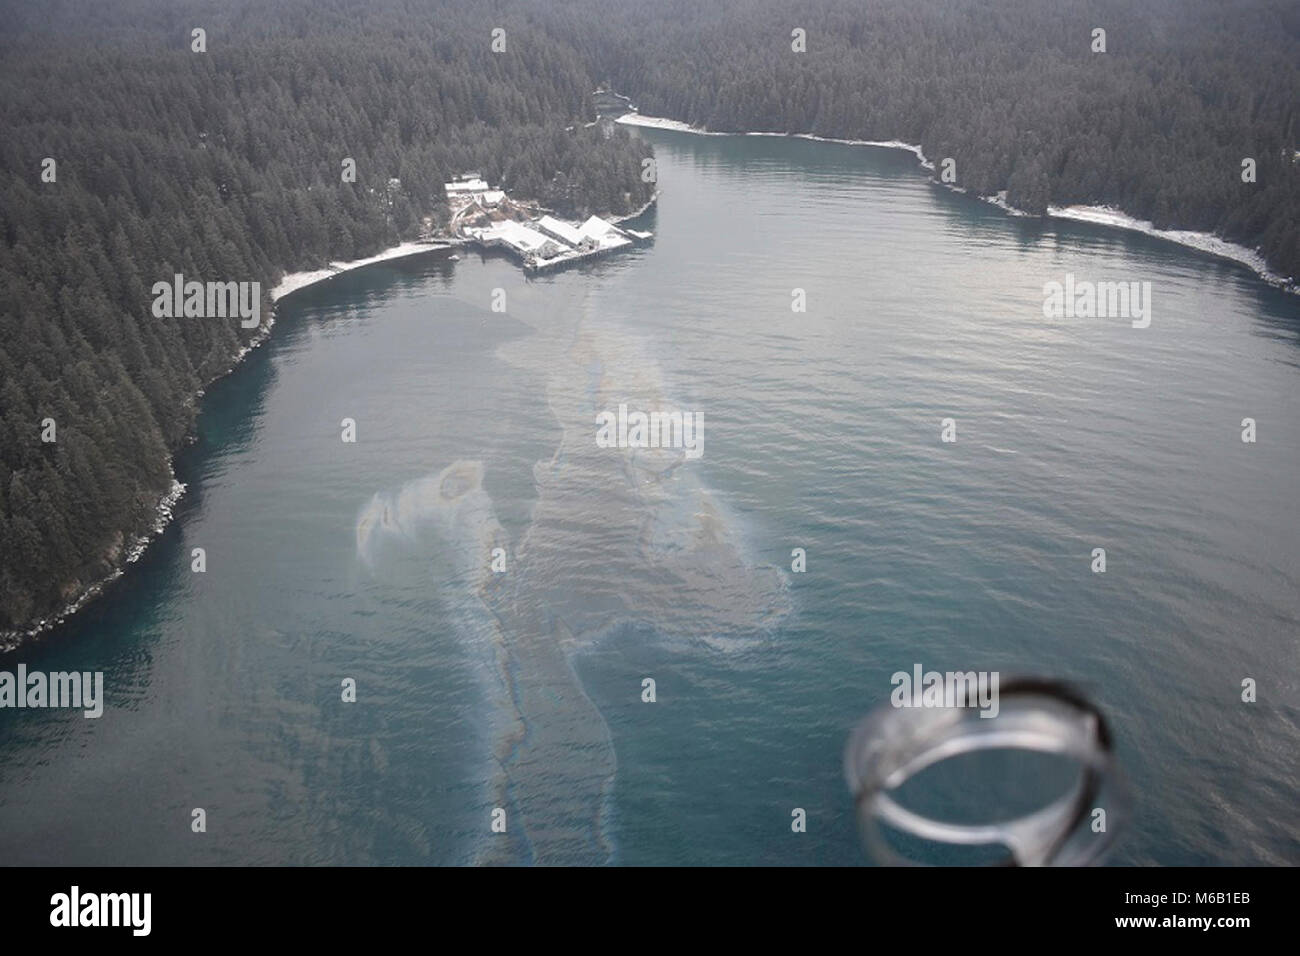 A Coast Guard Air Station Kodiak MH-60 helicopter crew and Marine Safety Detachment Kodiak pollution responders conduct an overflight in response to an oil spill in Shuyak Strait, 49 miles north of Kodiak, Alaska, Feb. 27, 2018. The Coast Guard and Alaska Department of Environmental Conservation established a unified command in response to the oil spill. U.S. Coast Guard Stock Photo